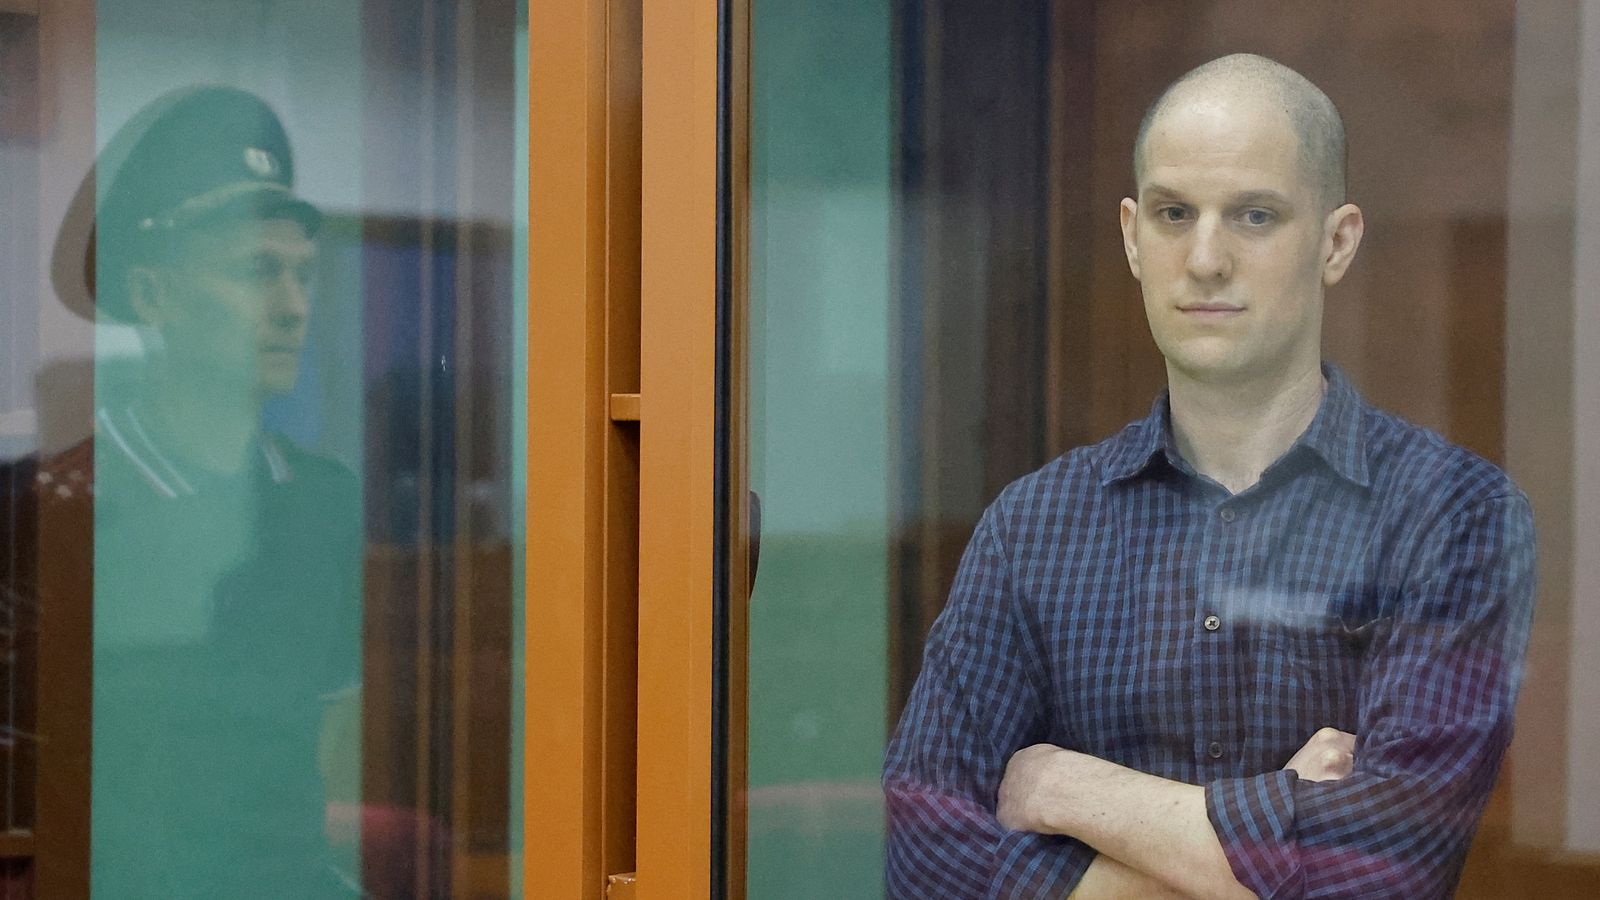 Evan Gershkovich: US journalist seen with shaved head as goes on trial in Russia for spying